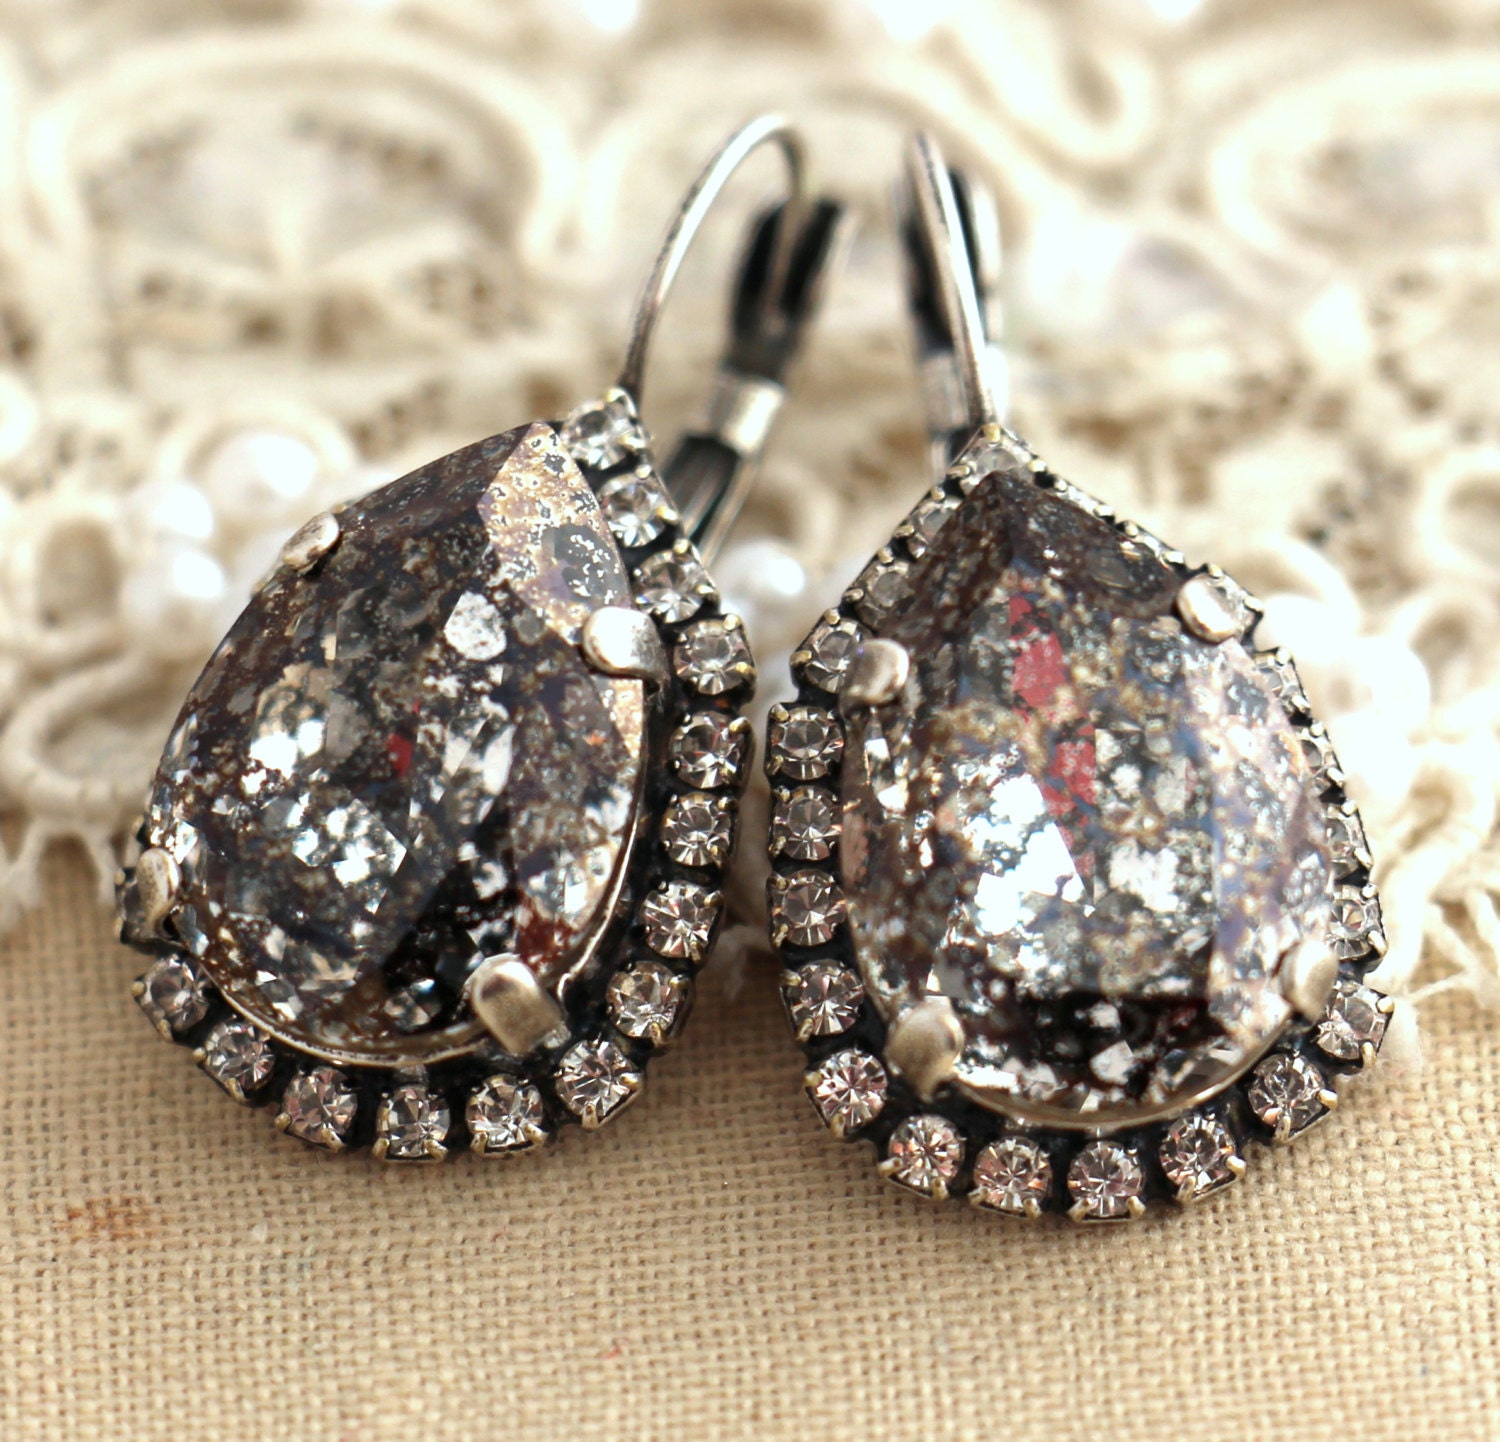 Sparkly Everyday Chic Drop Earrings Smoky Gray Crystal Statement Dangle Earrings Boho Gray and Black Crystal Drop Earrings